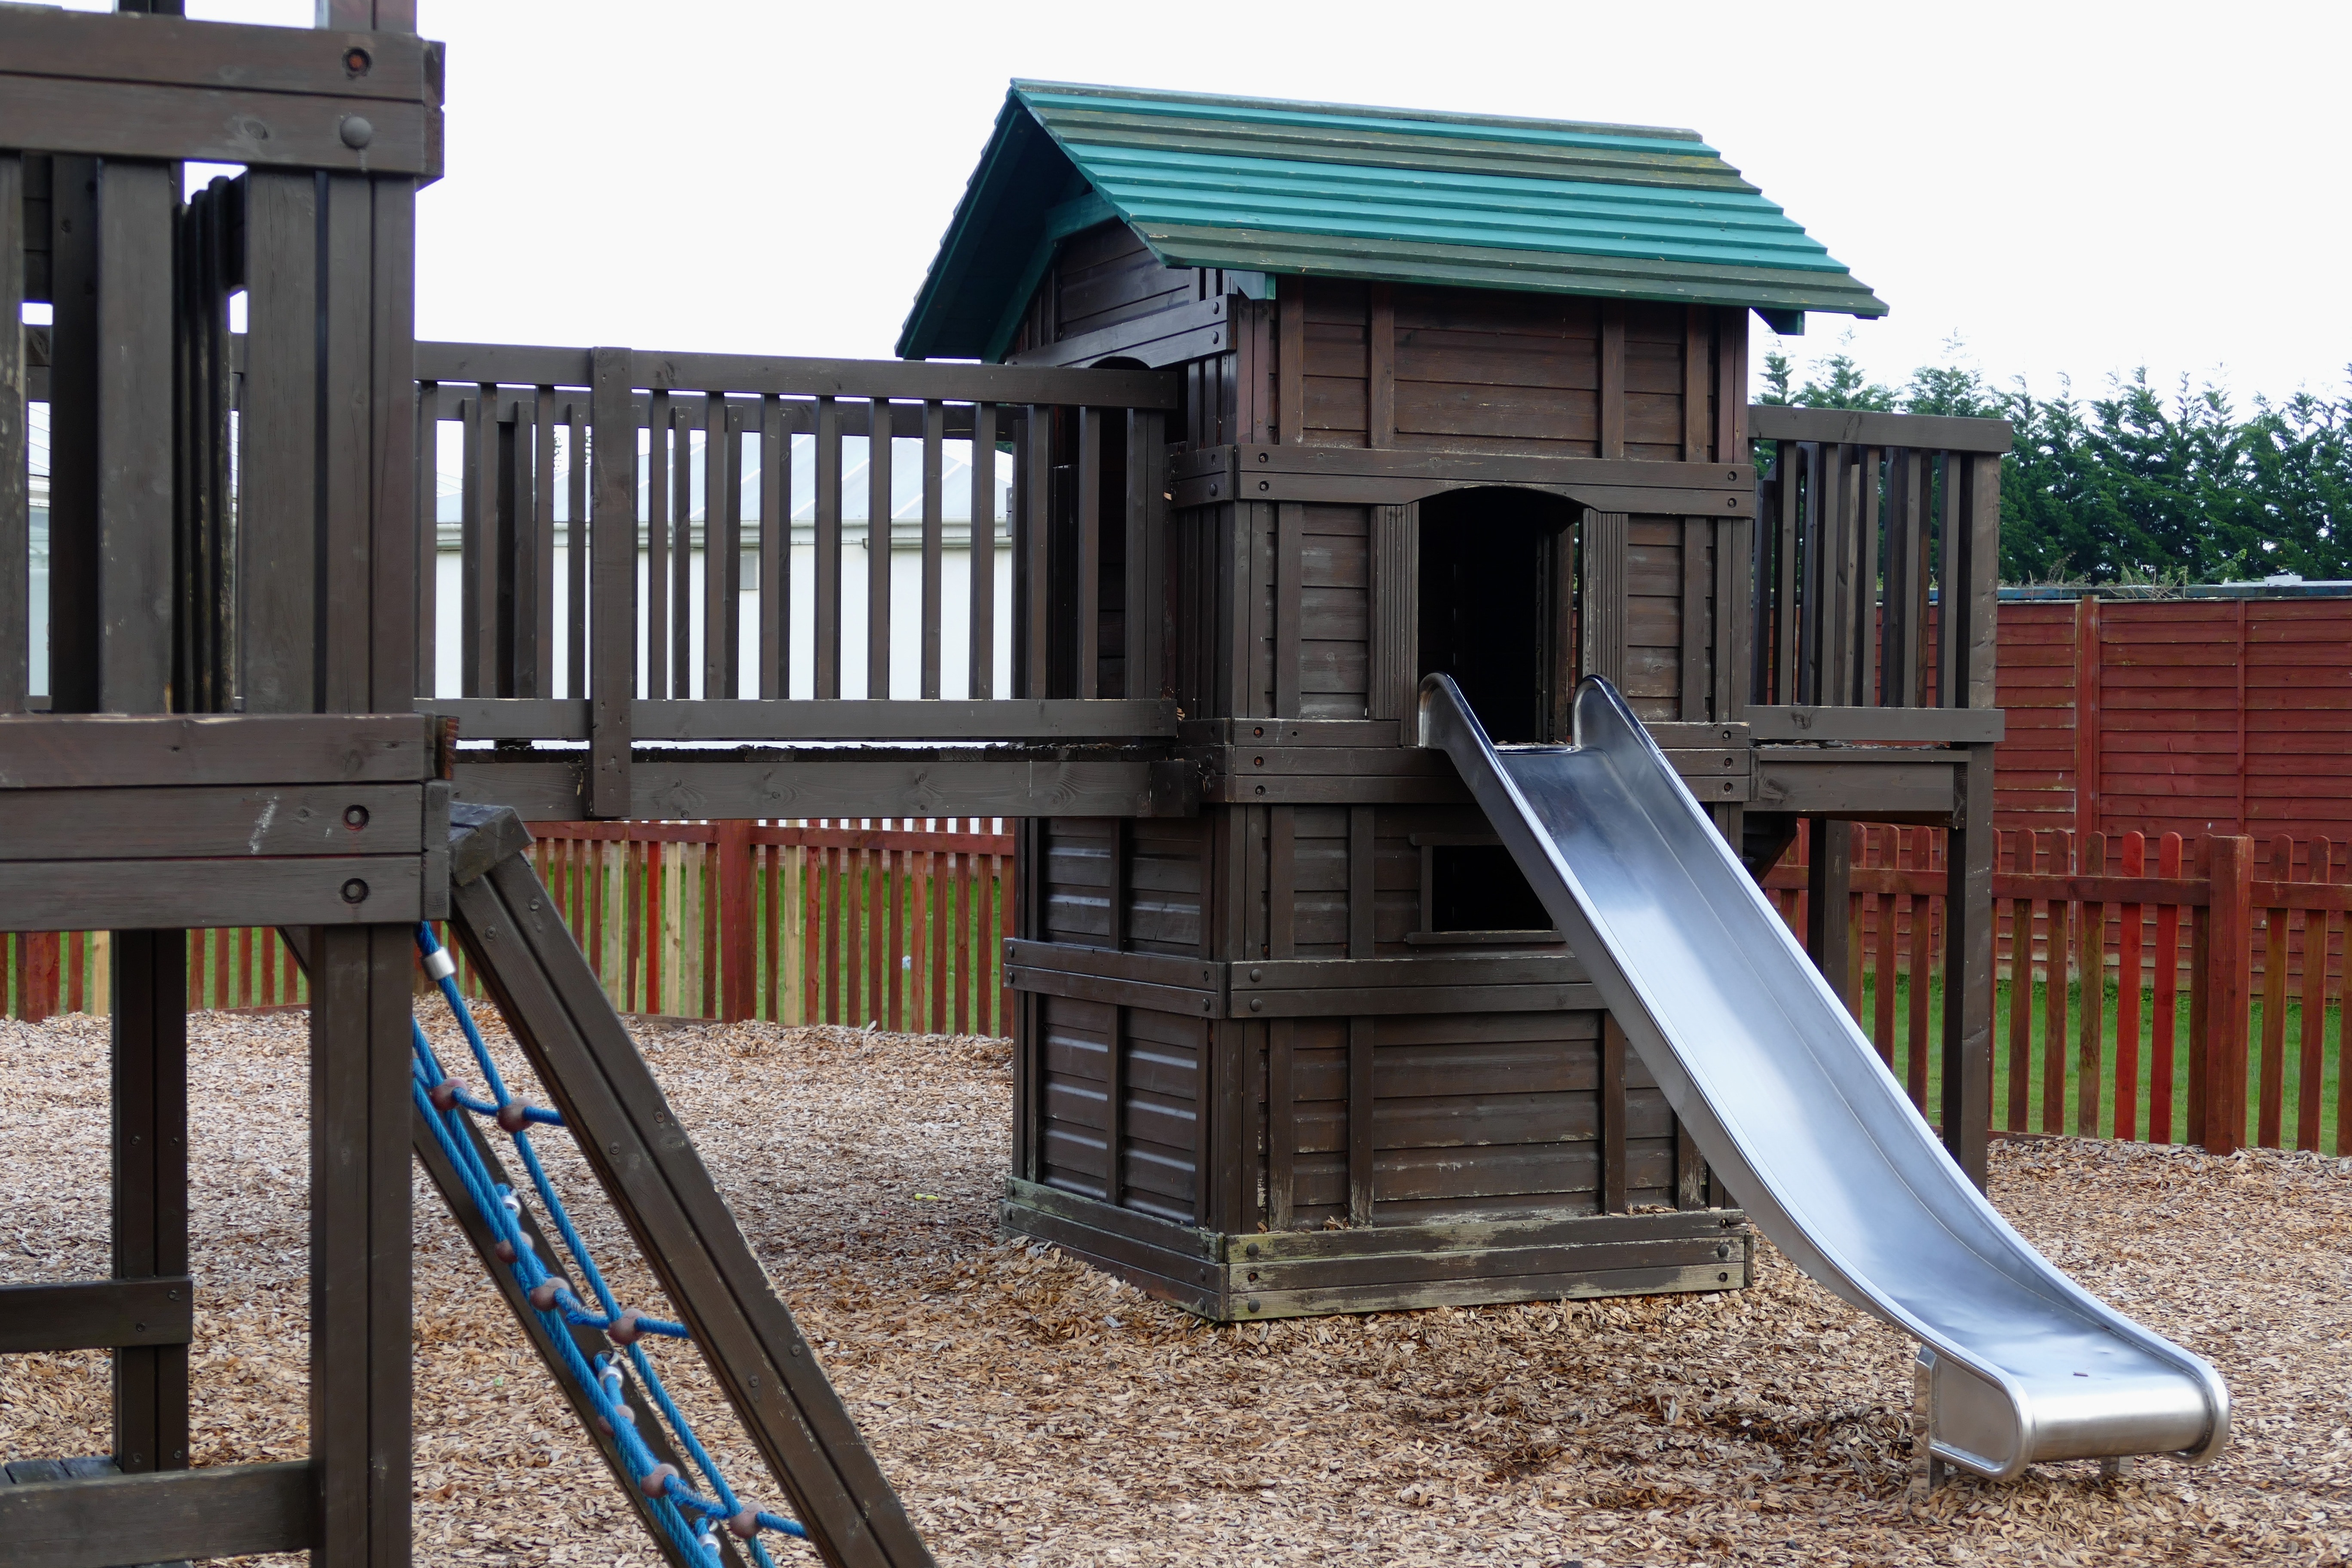 brown gray and green wooden playhouse with slide during daytime